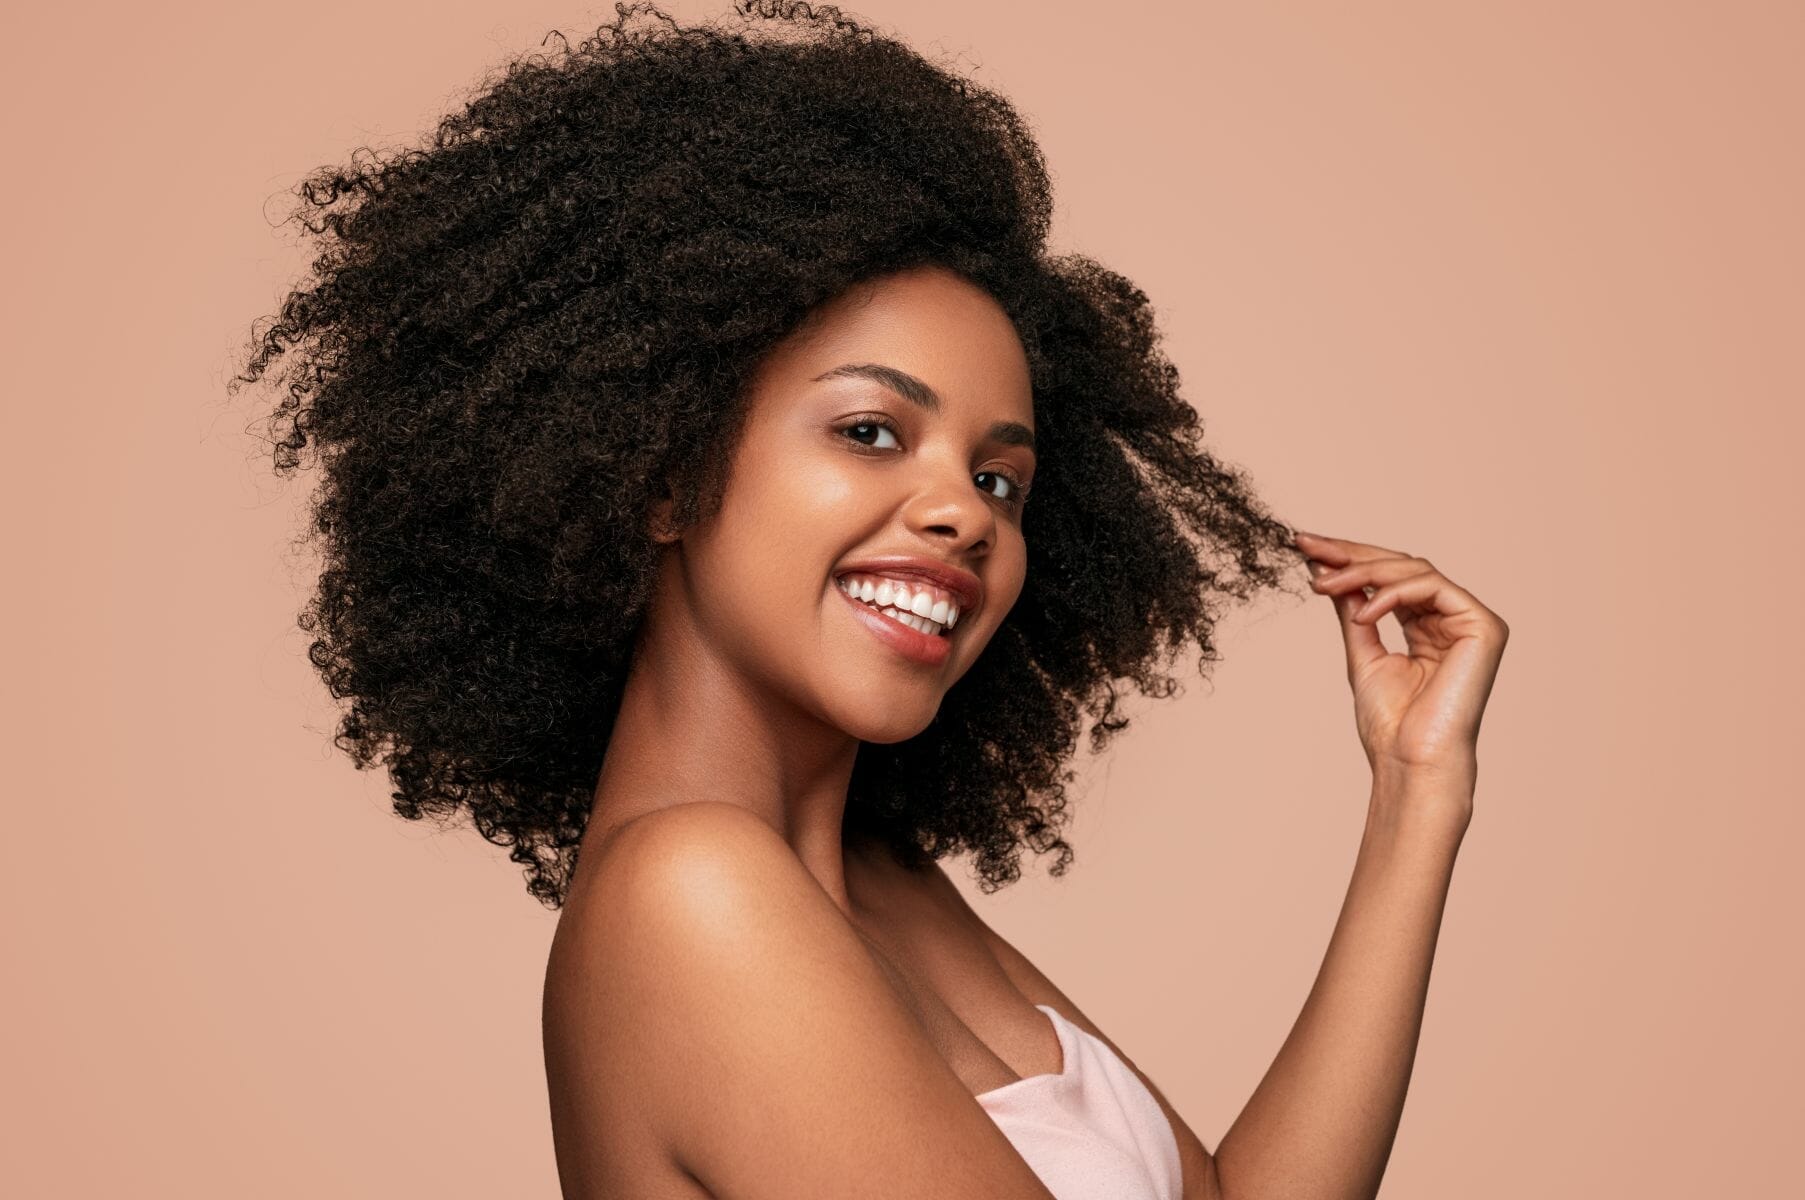 Side view of positive African American female model smiling for camera and touching clean curly hair after hygienic routine against brown background